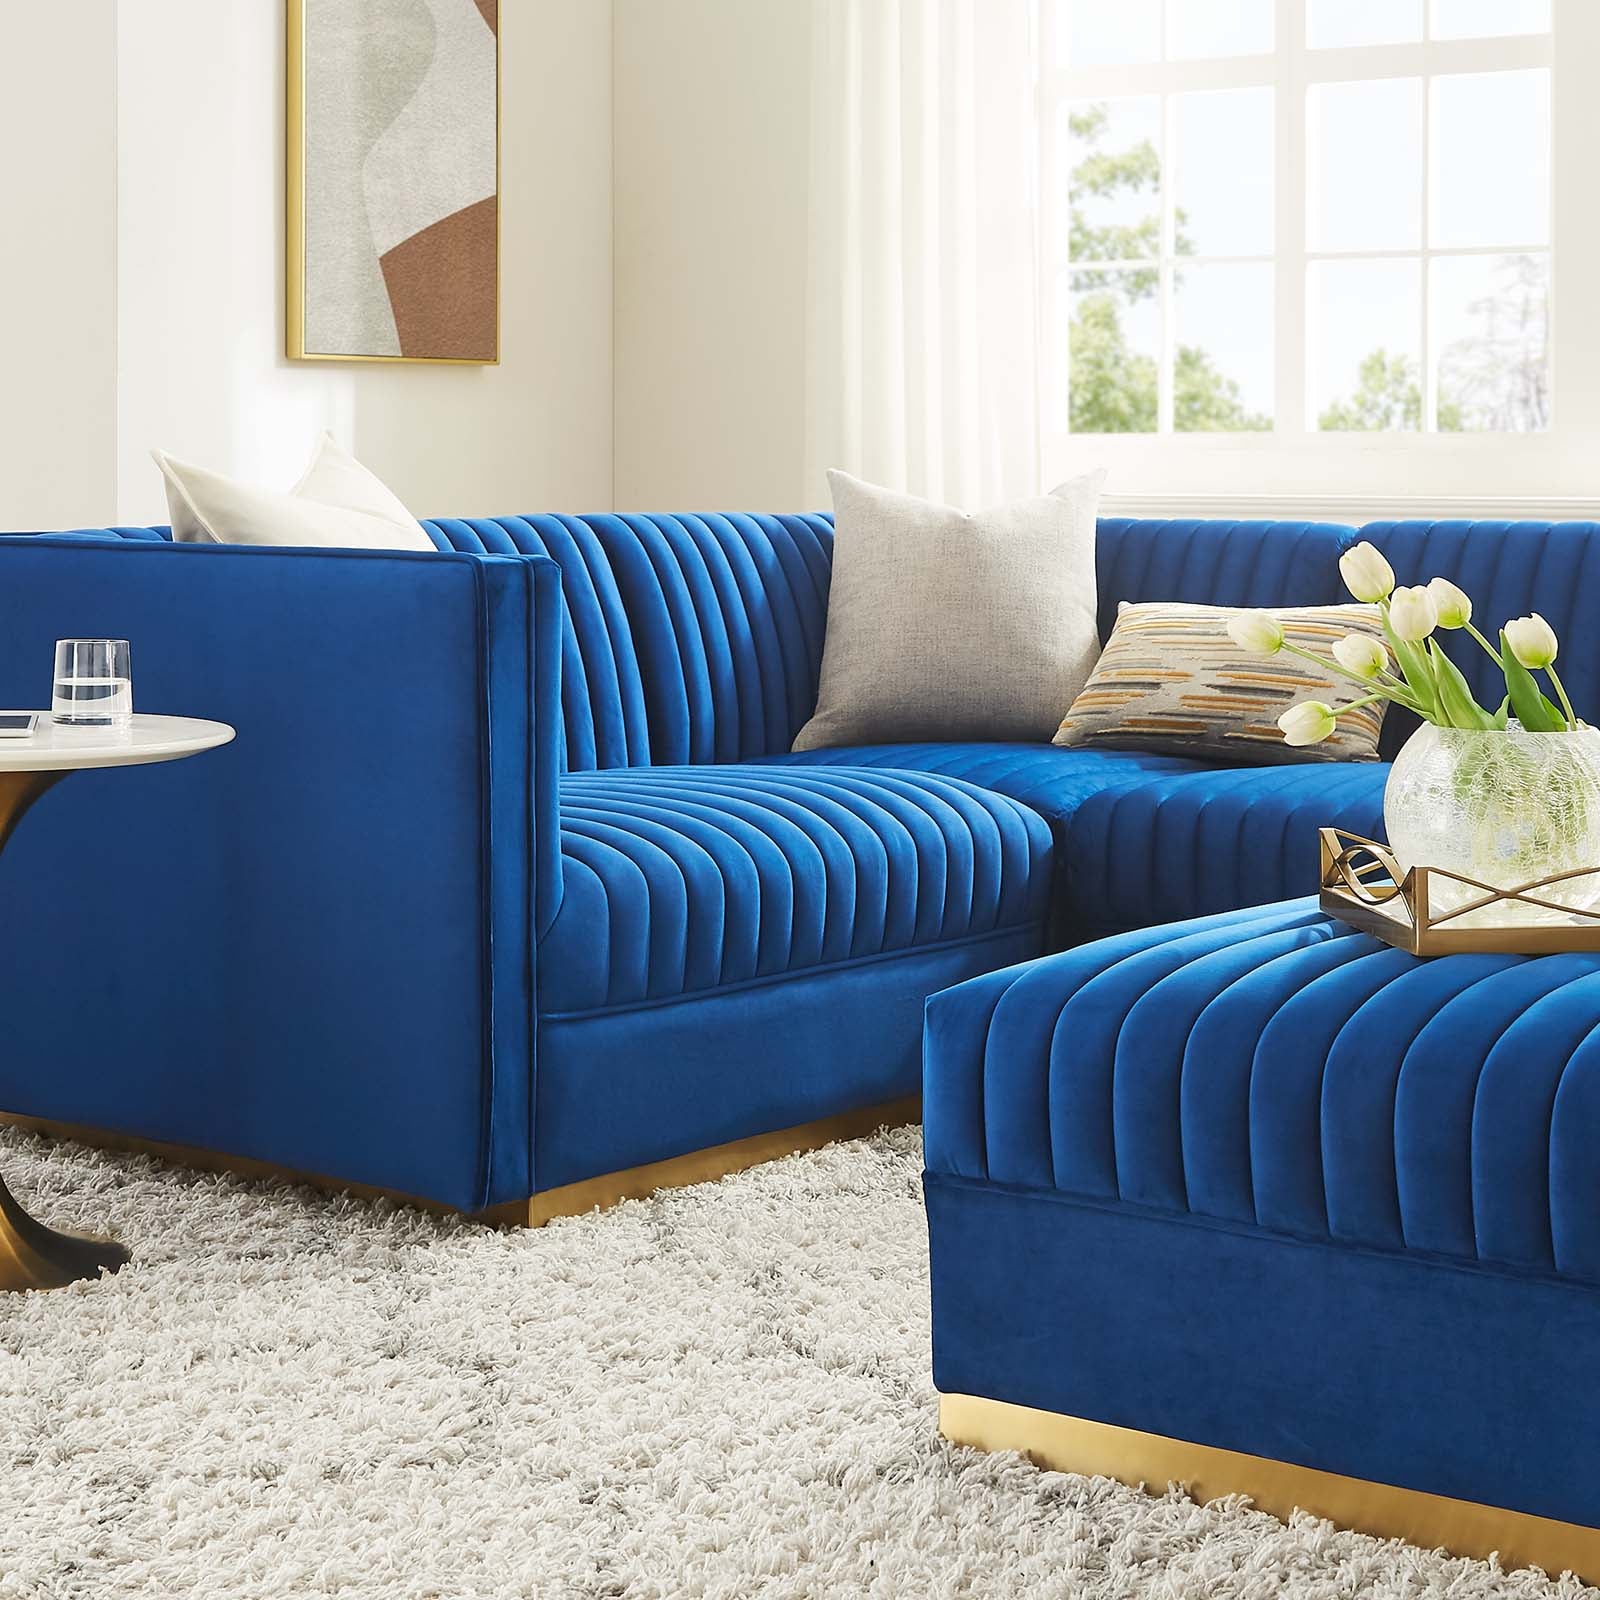 Modway Sectional Sofas - Sanguine Channel Tufted Performance Velvet 5 Piece Left-Facing Modular Sectional Sofa Navy